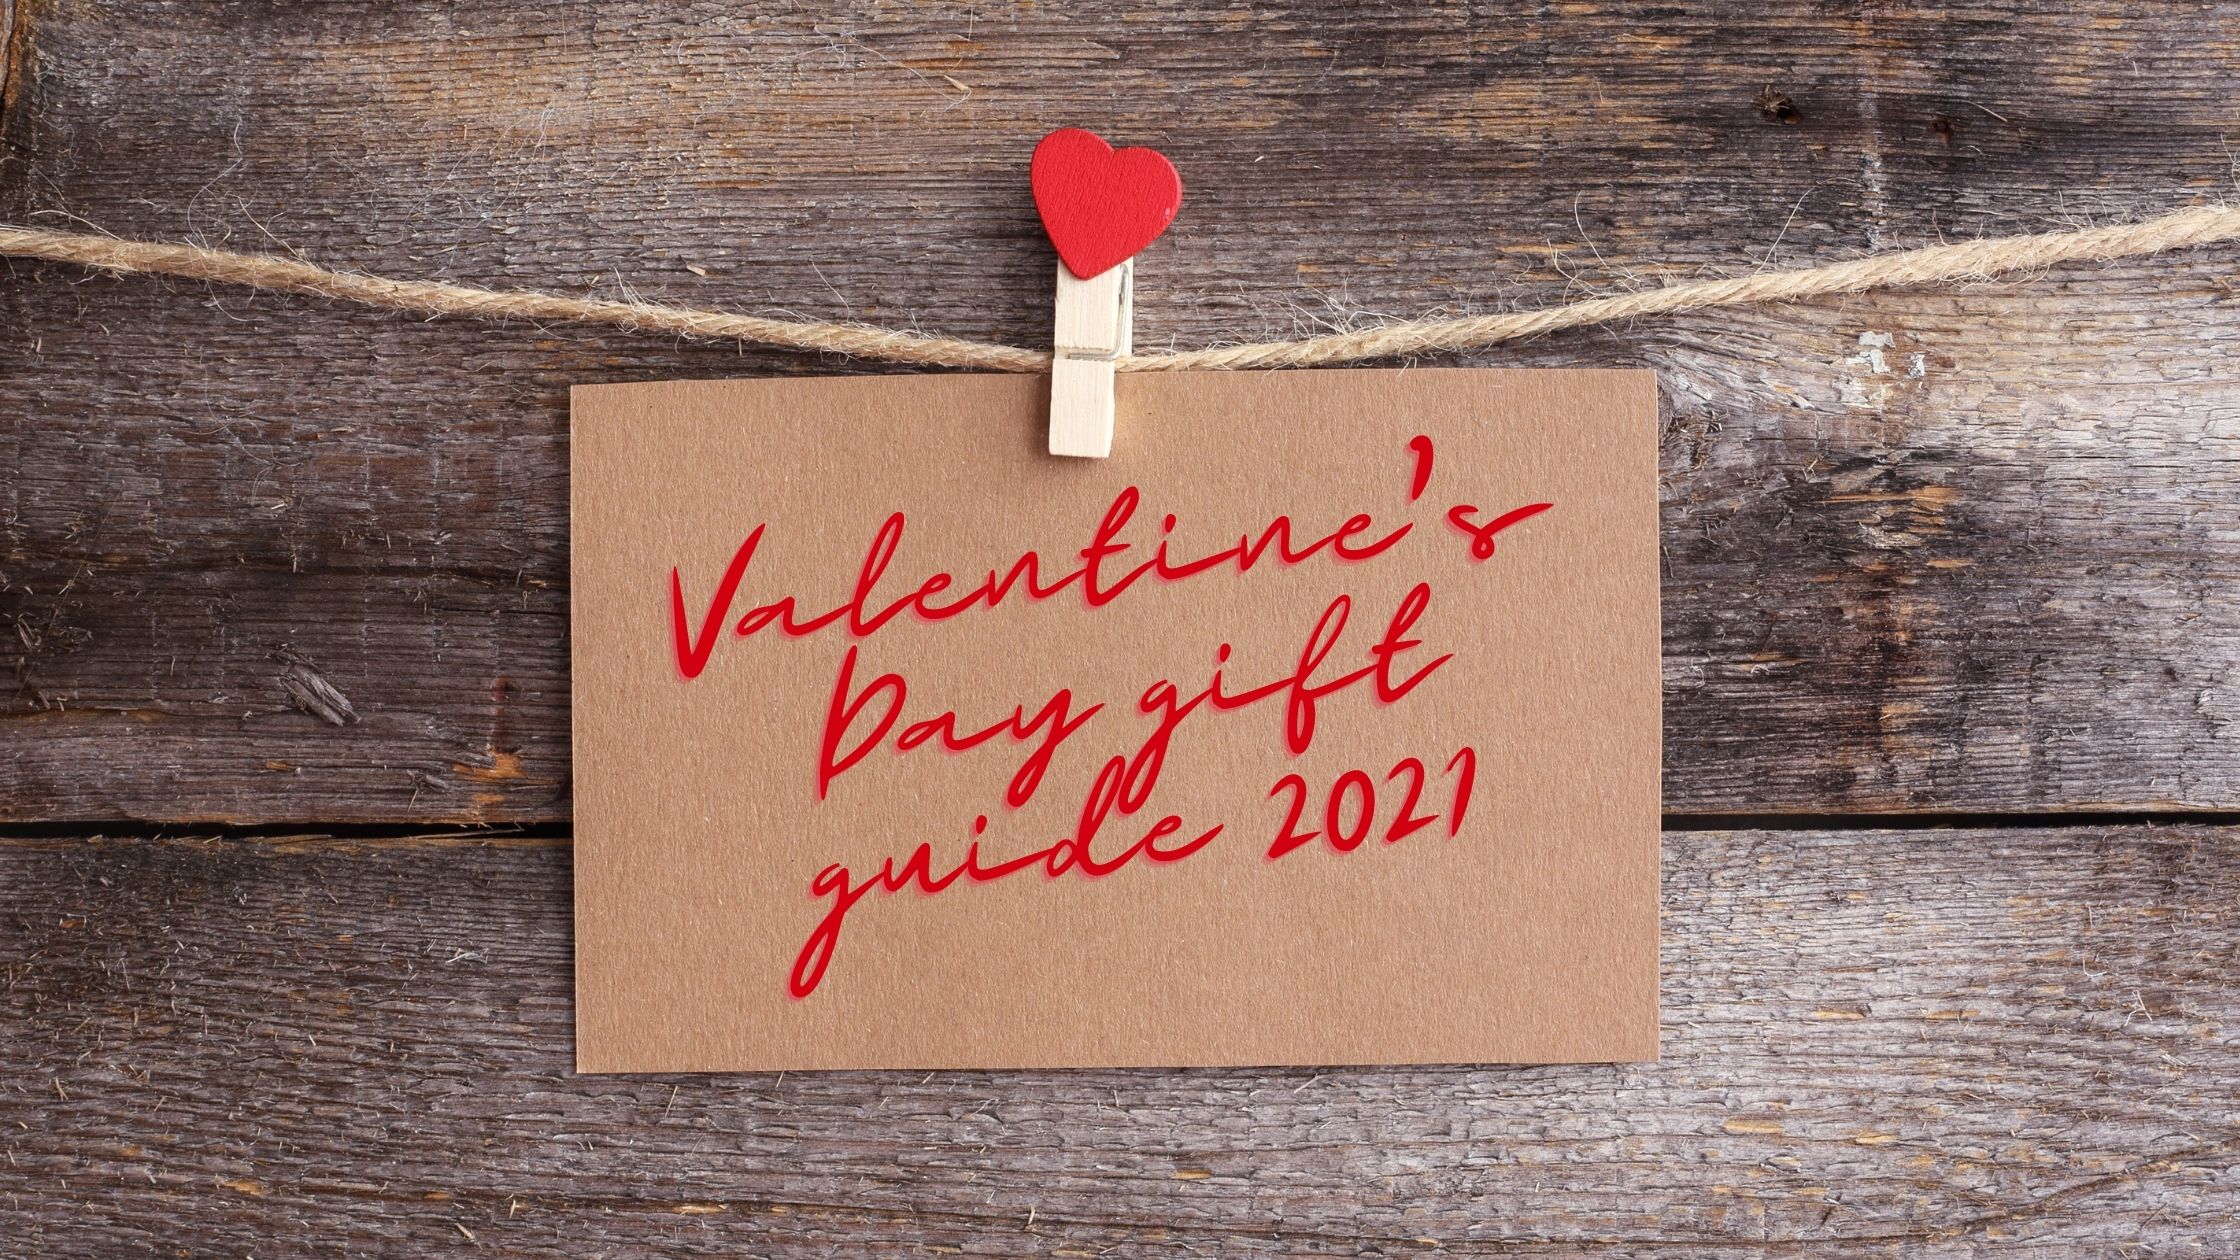 Valentine's ay gift guide 2021